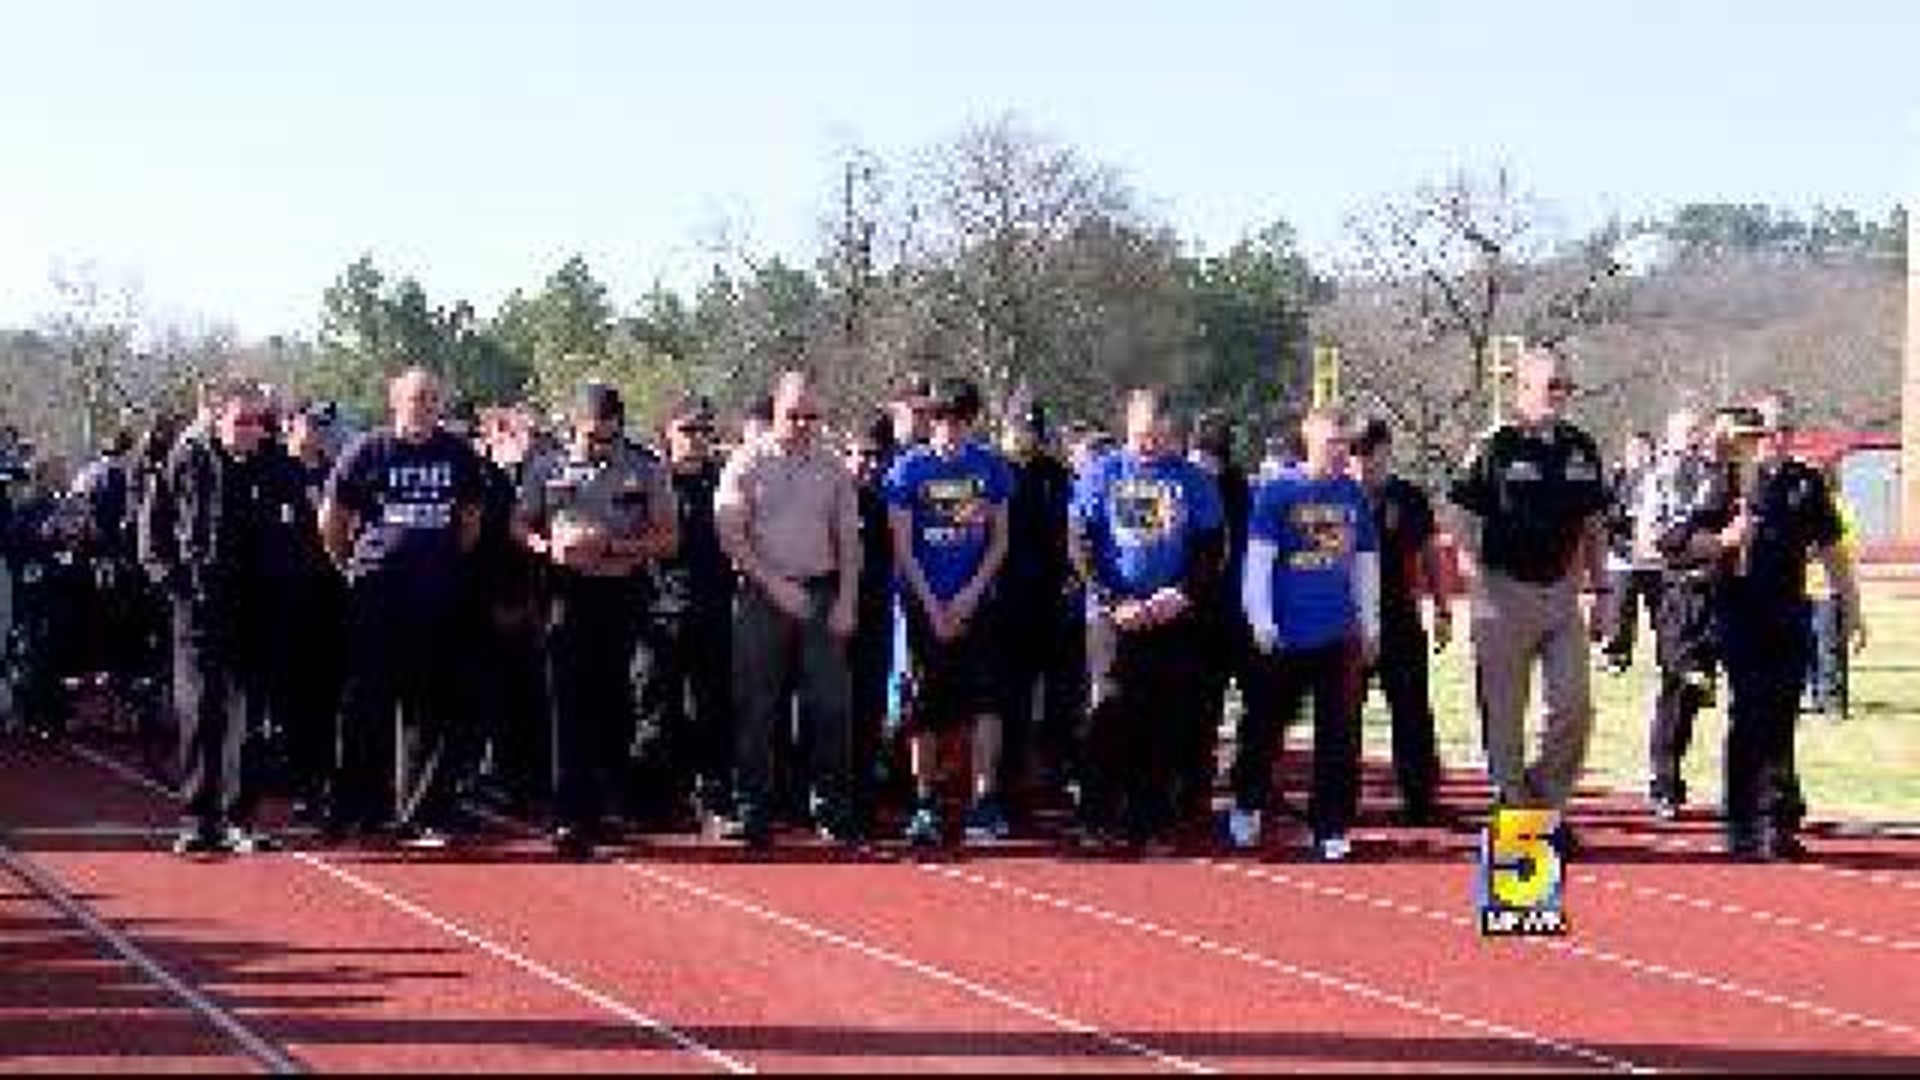 Athletes Honored at Special Olympics Event